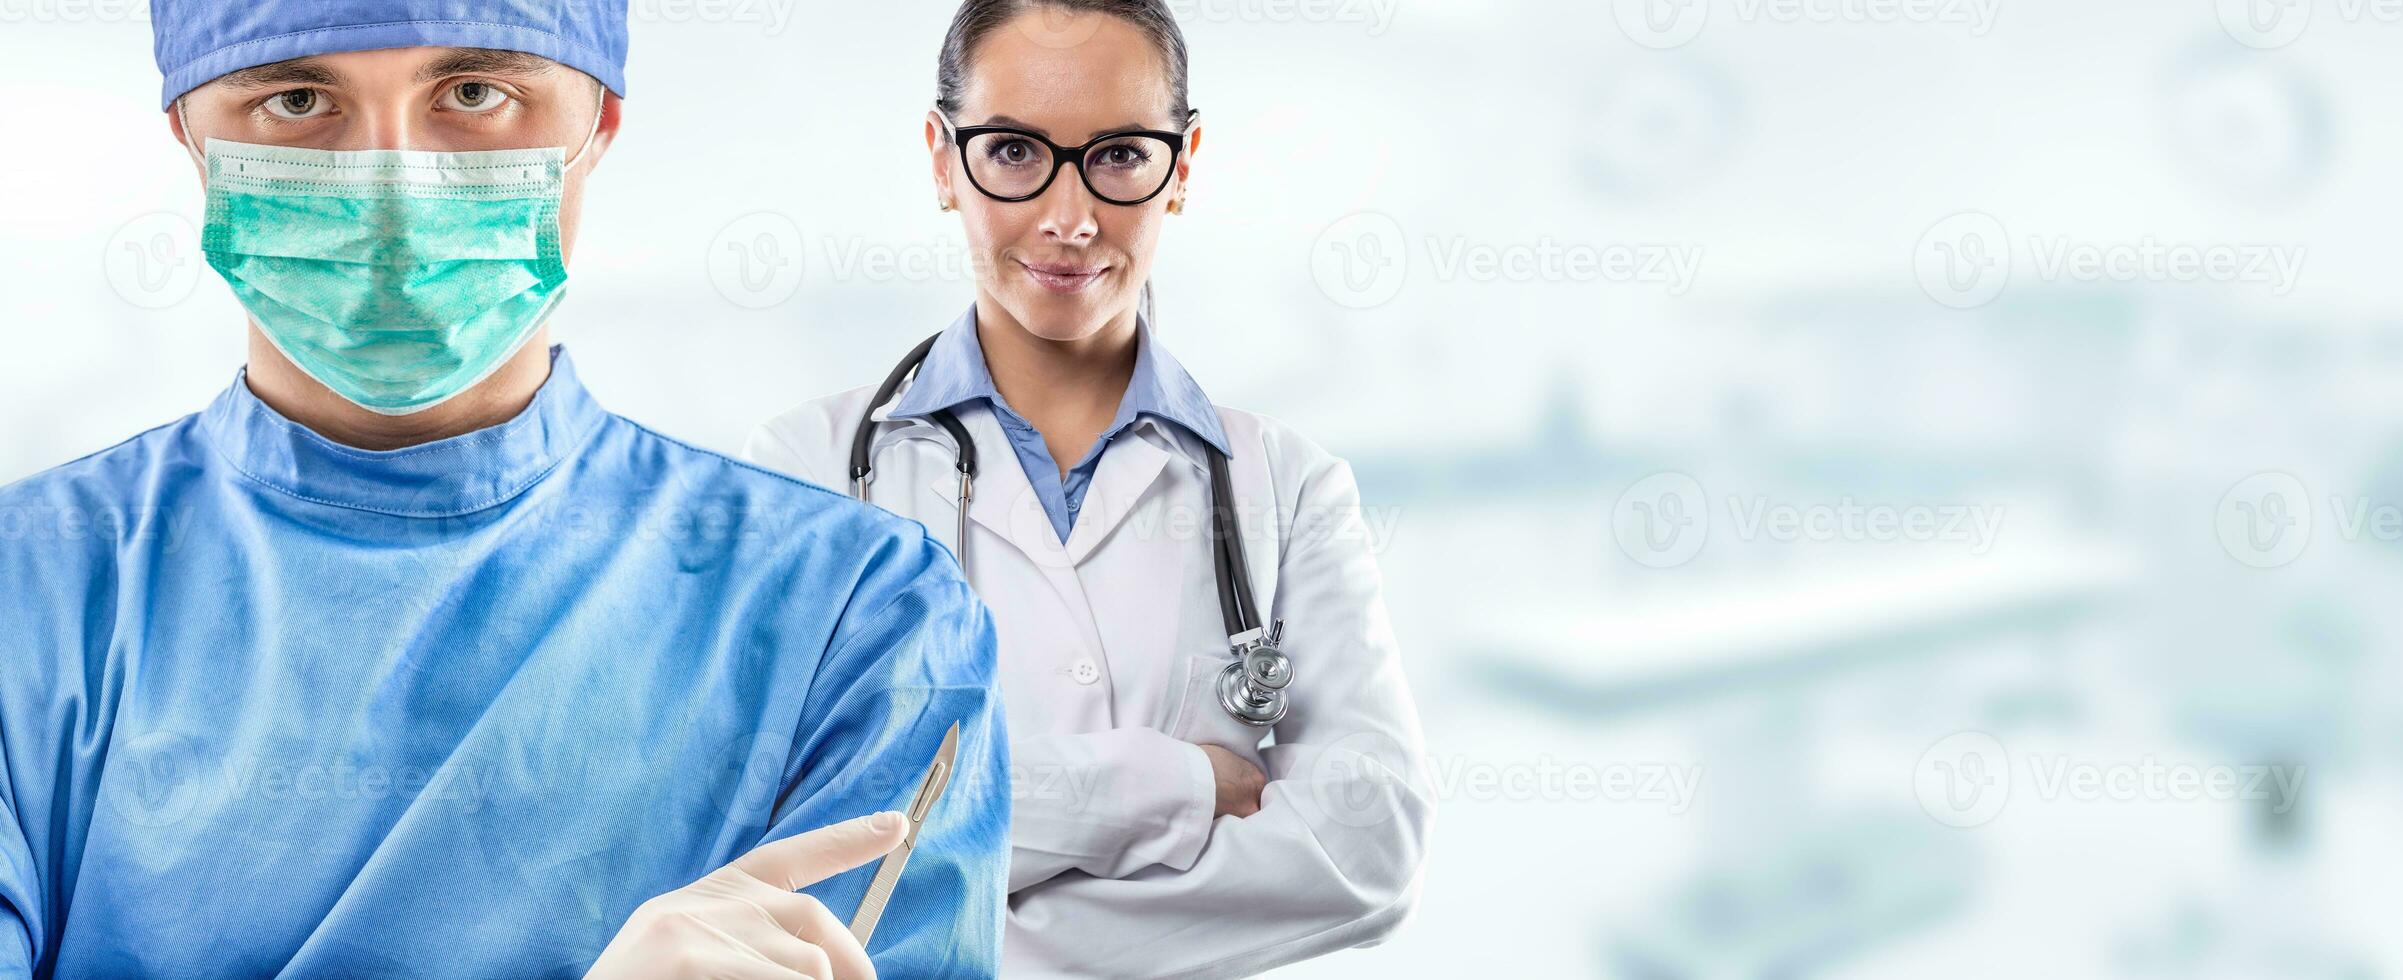 Young couple of surgeon and doctor in front of blurred the interior of the operating room or clinic photo